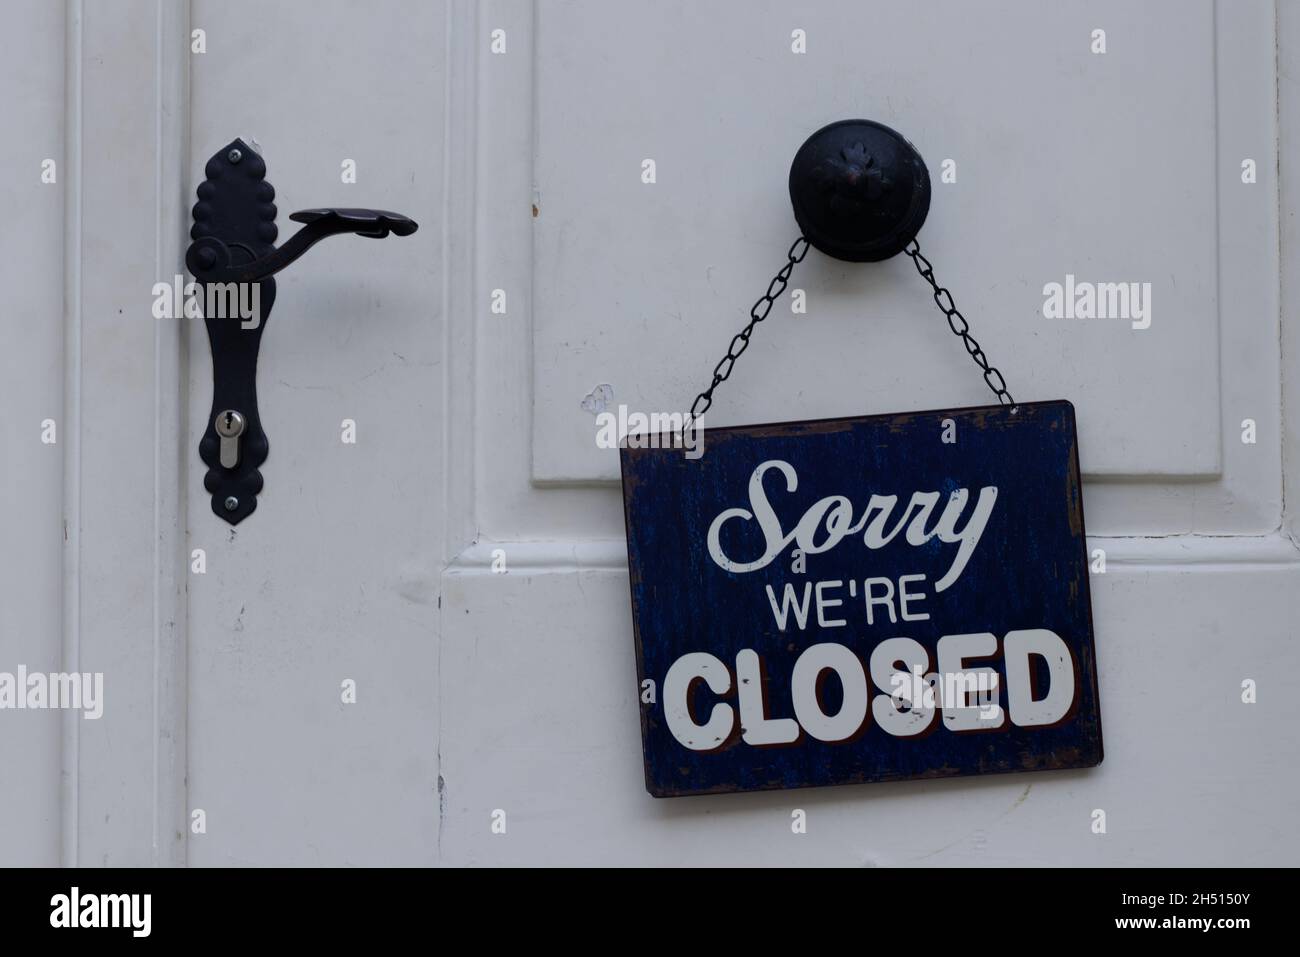 Sorry we are closed sign hanging on a white doors with door handle Stock Photo